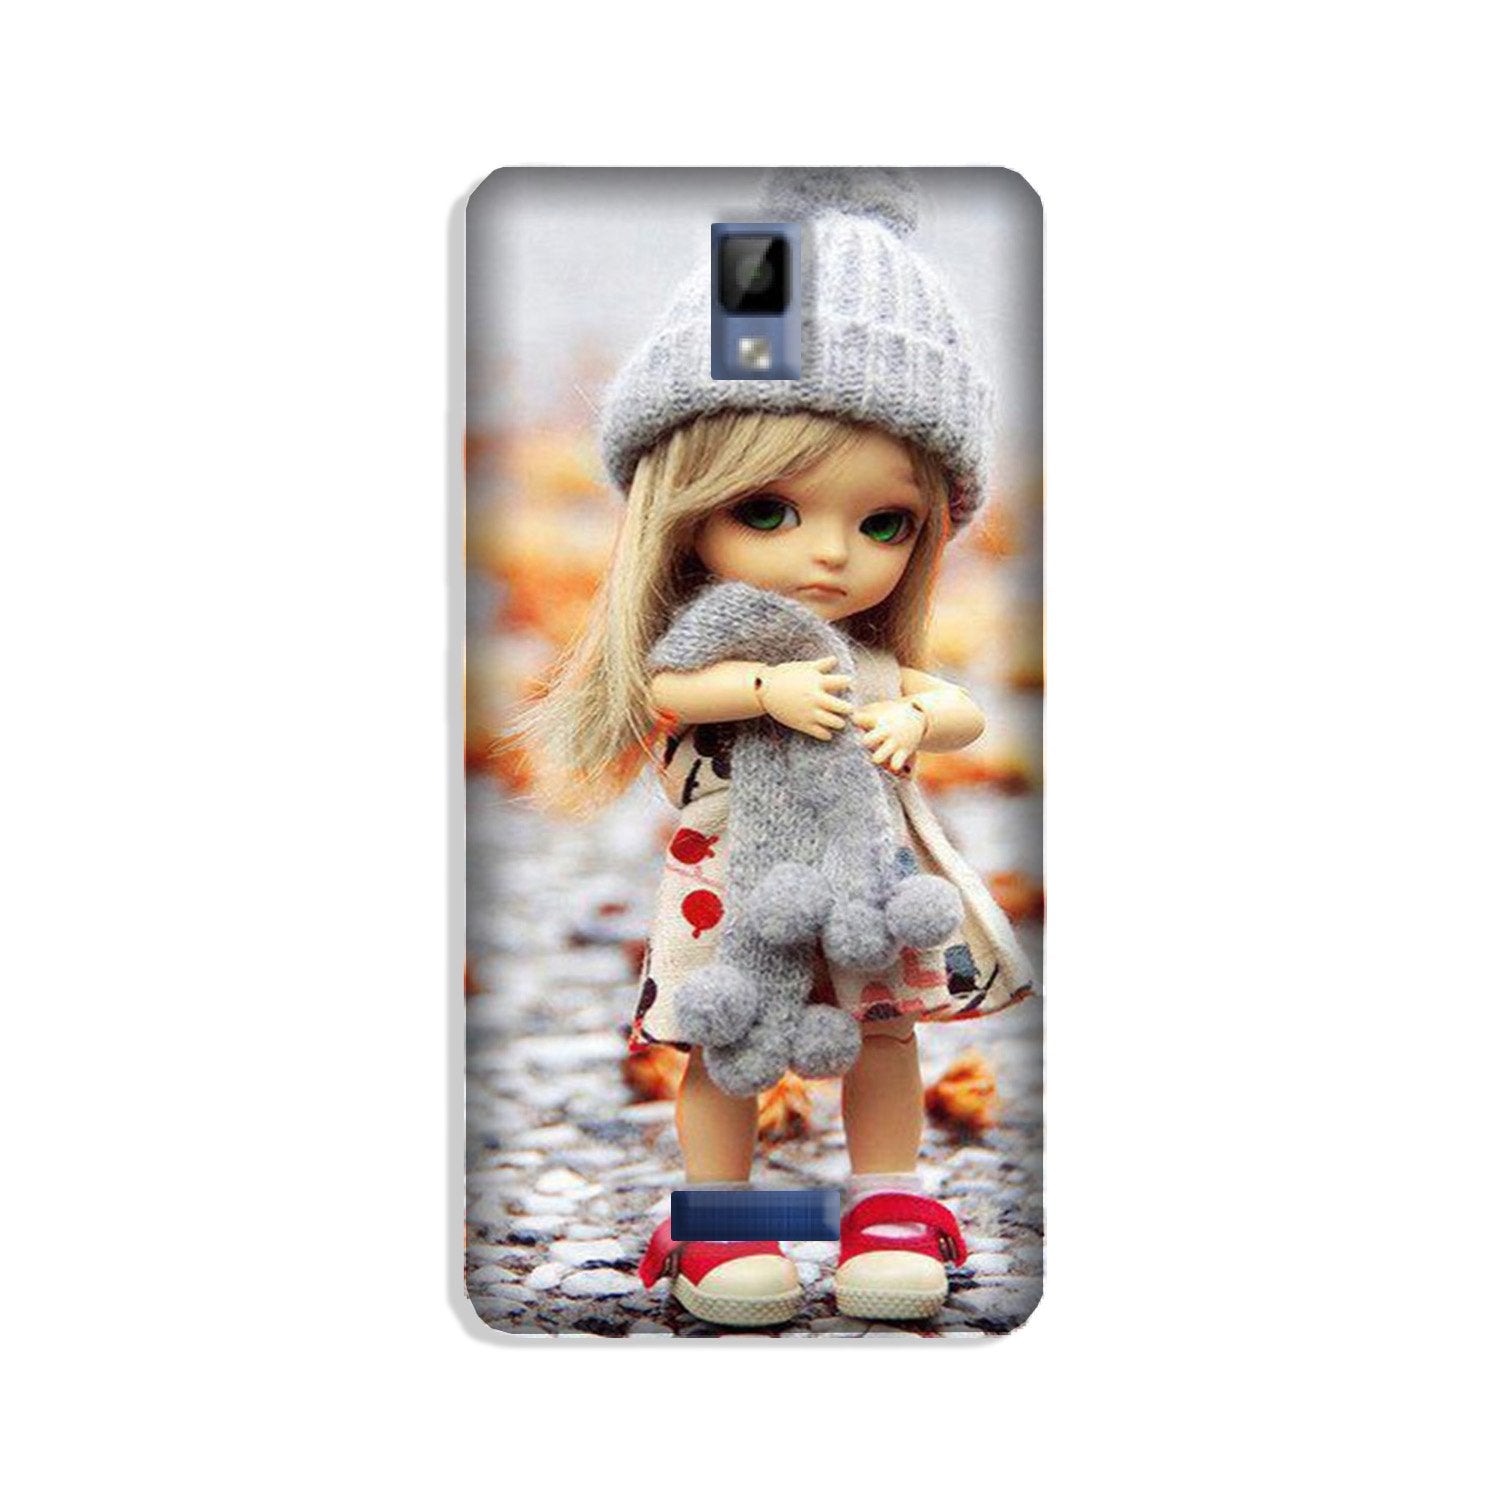 Cute Doll Case for Gionee P7